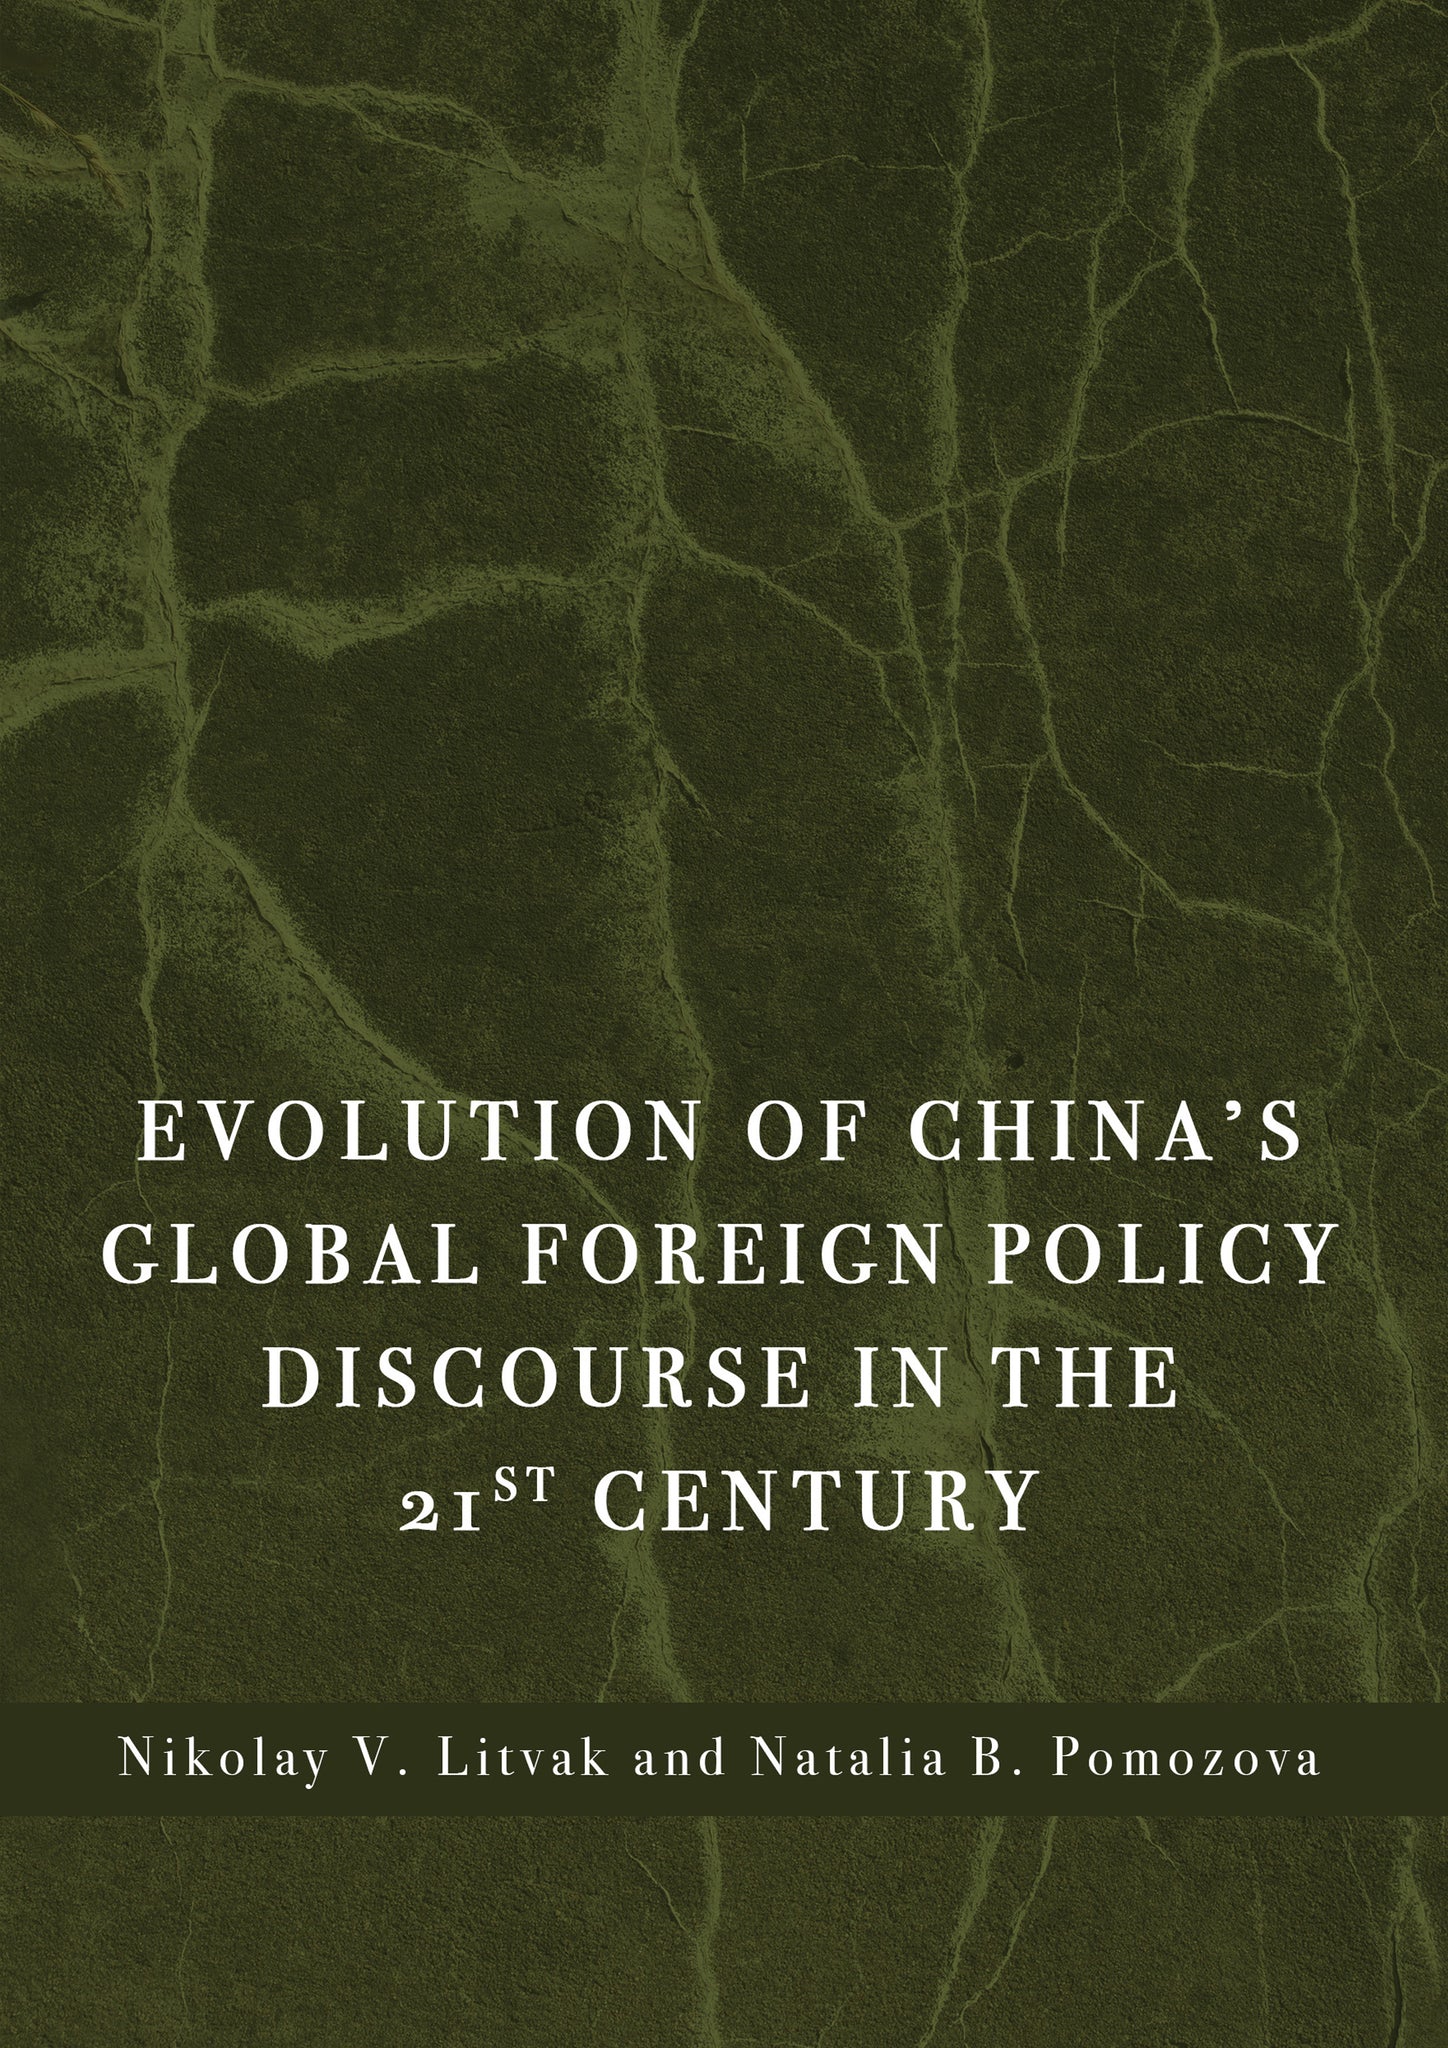 Evolution of China’s Global Foreign Policy Discourse in the 21st Century